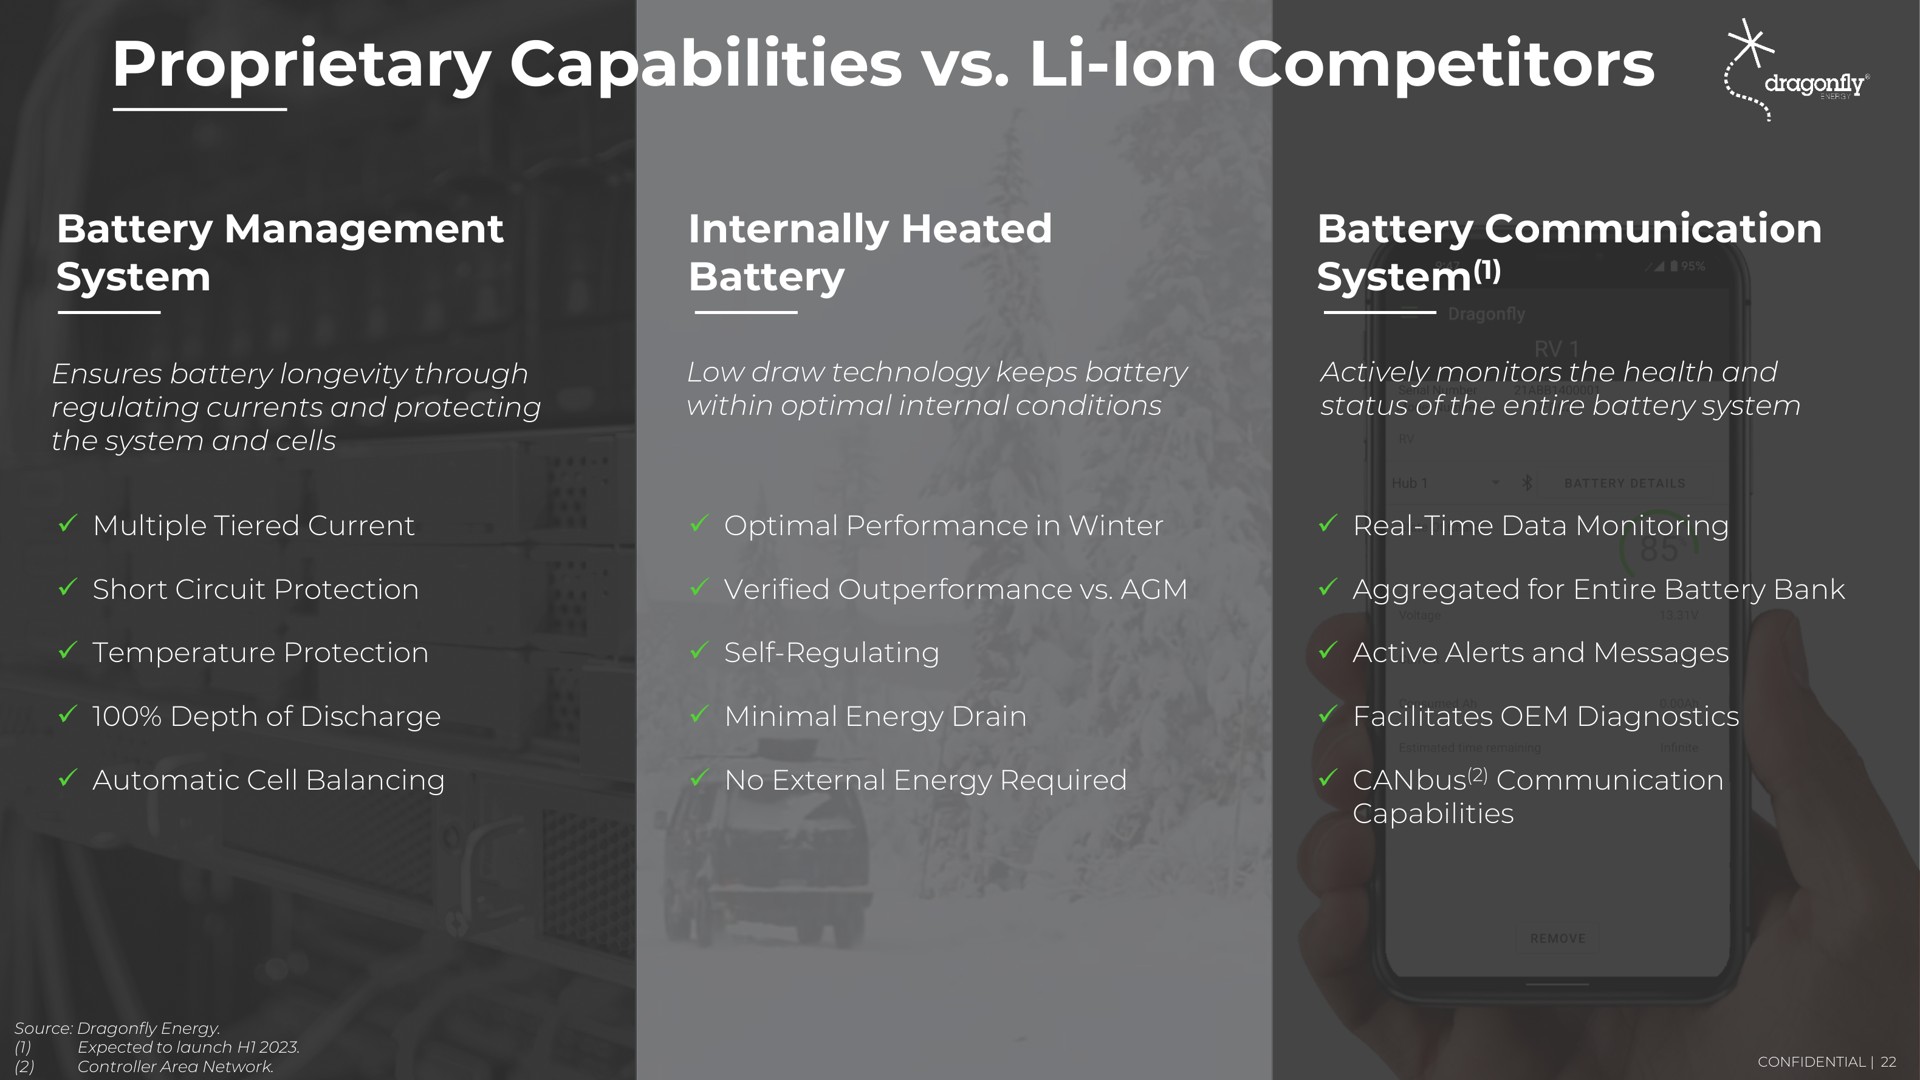 proprietary capabilities ion competitors battery management system internally heated battery battery communication system | Dragonfly Energy